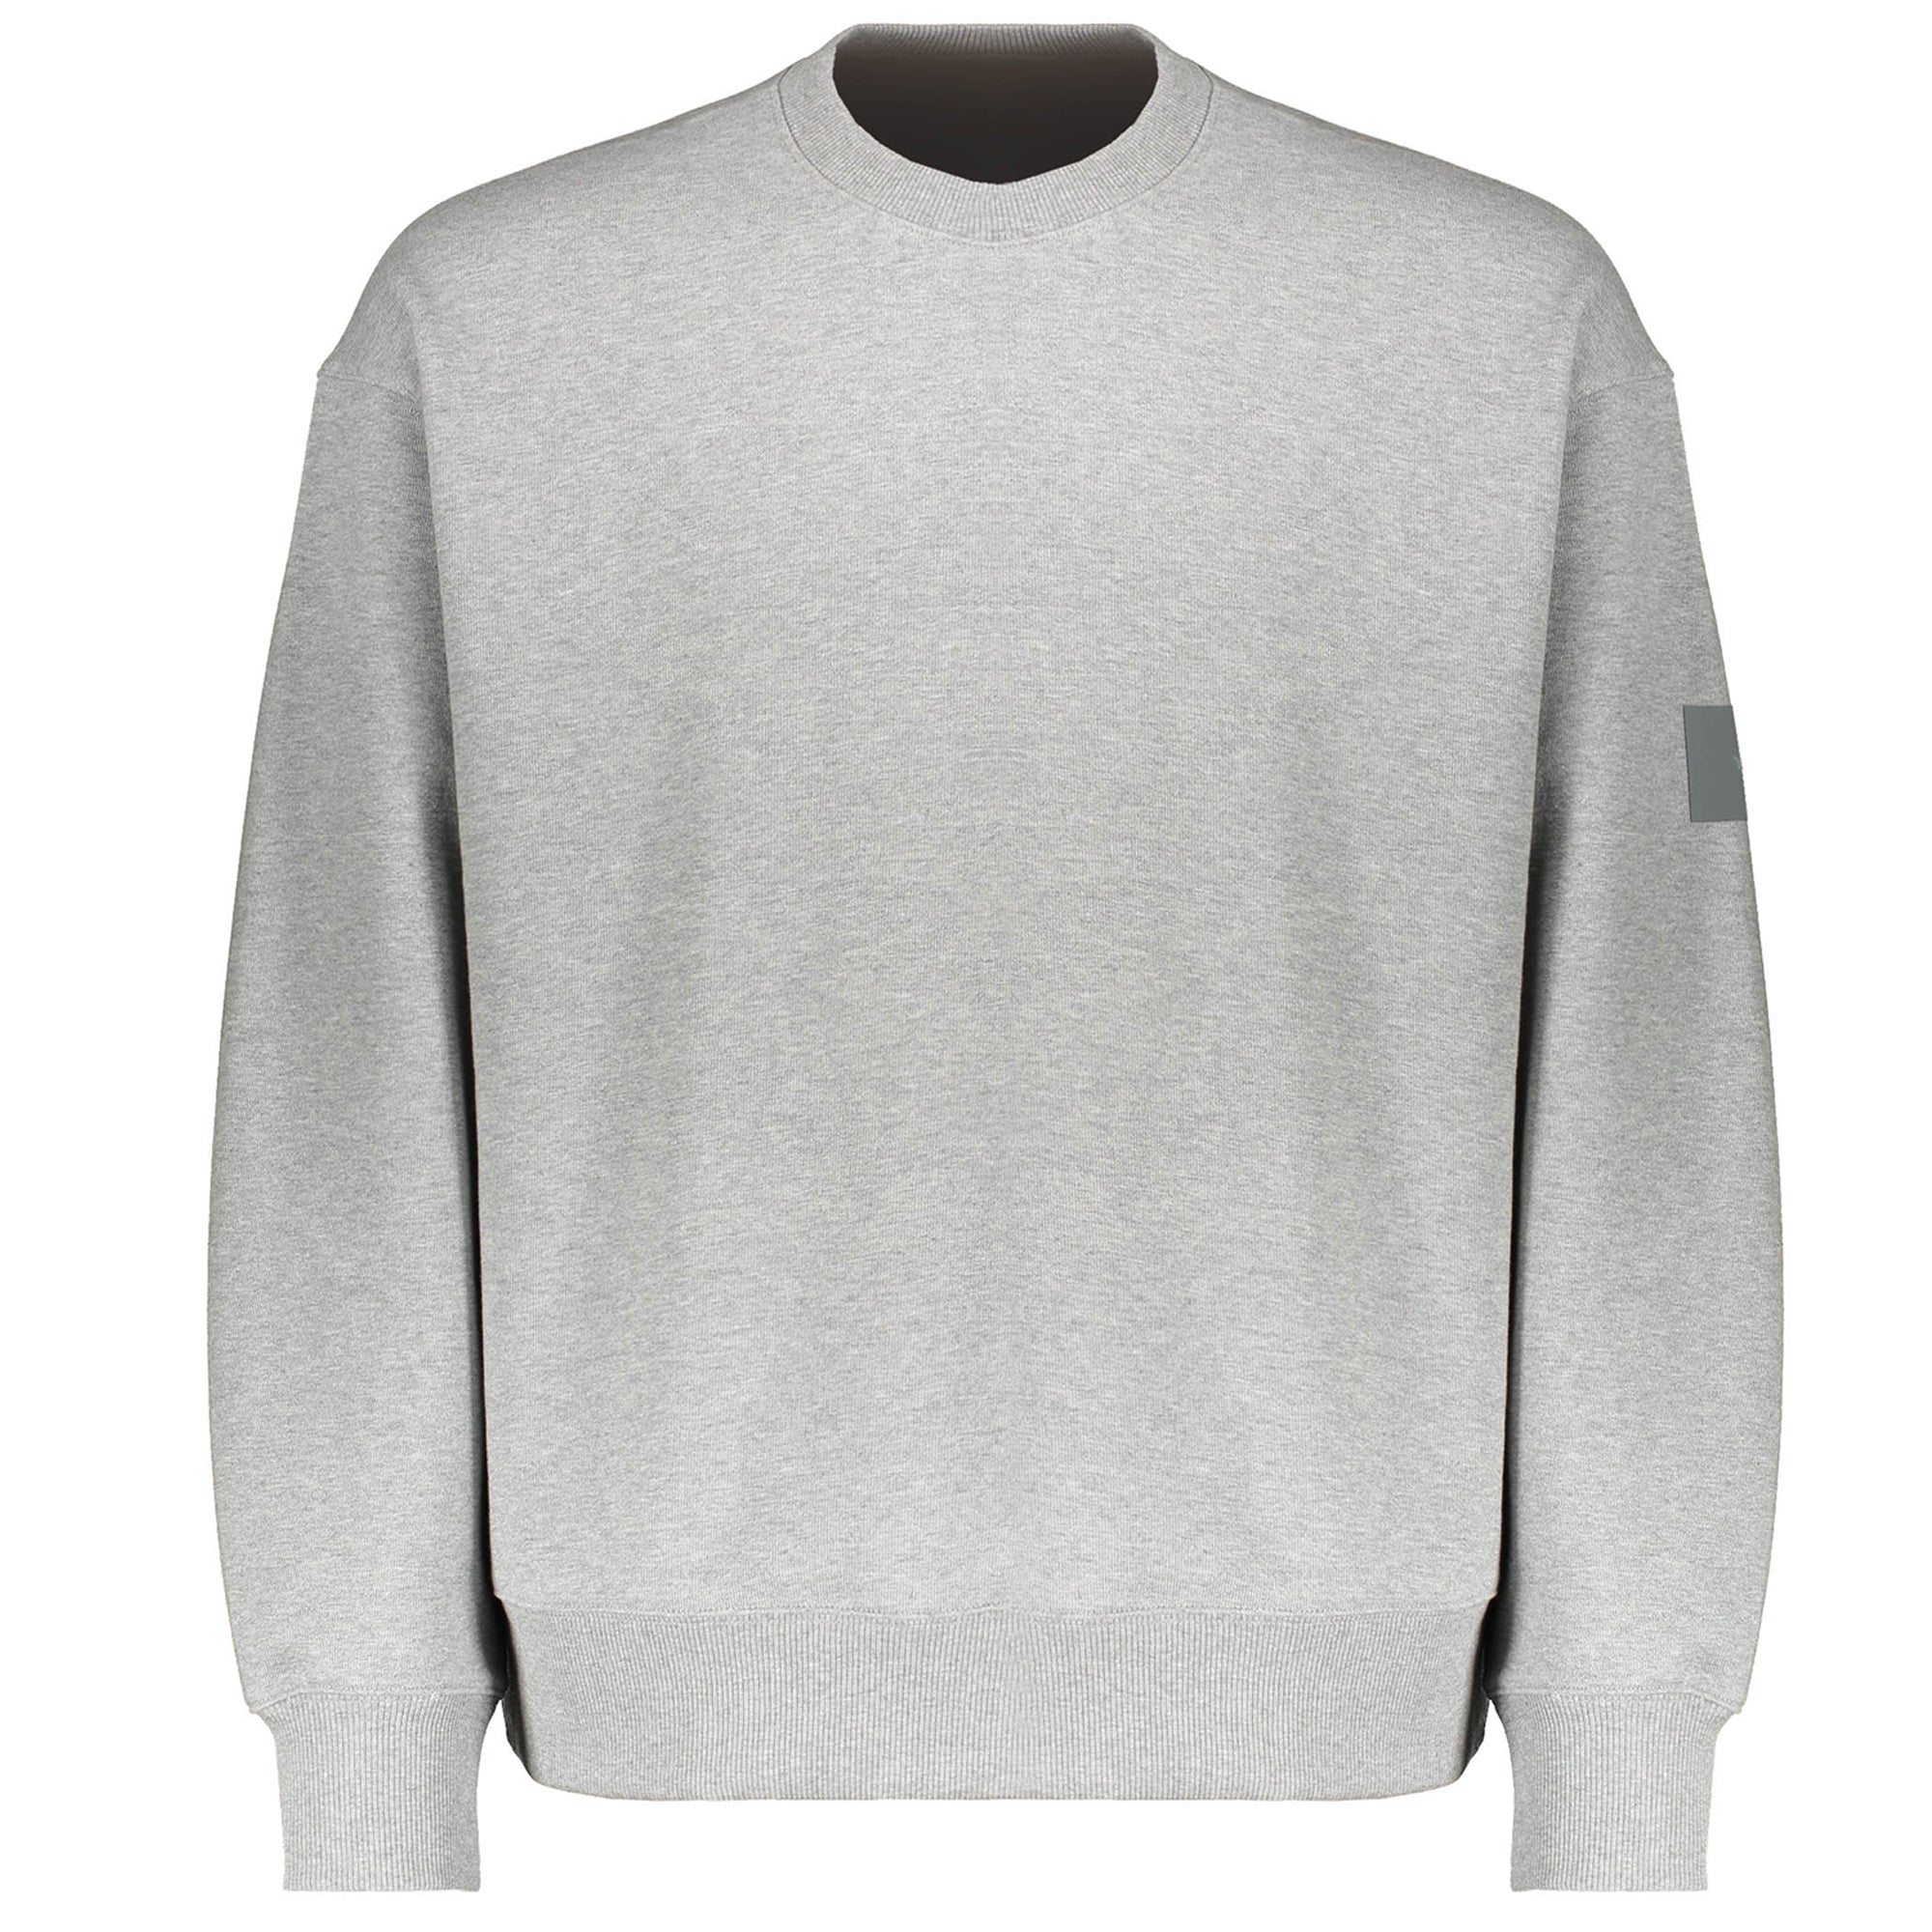 Image of Y-3 Mens Organic Terry Crew Neck Sweater Grey Large